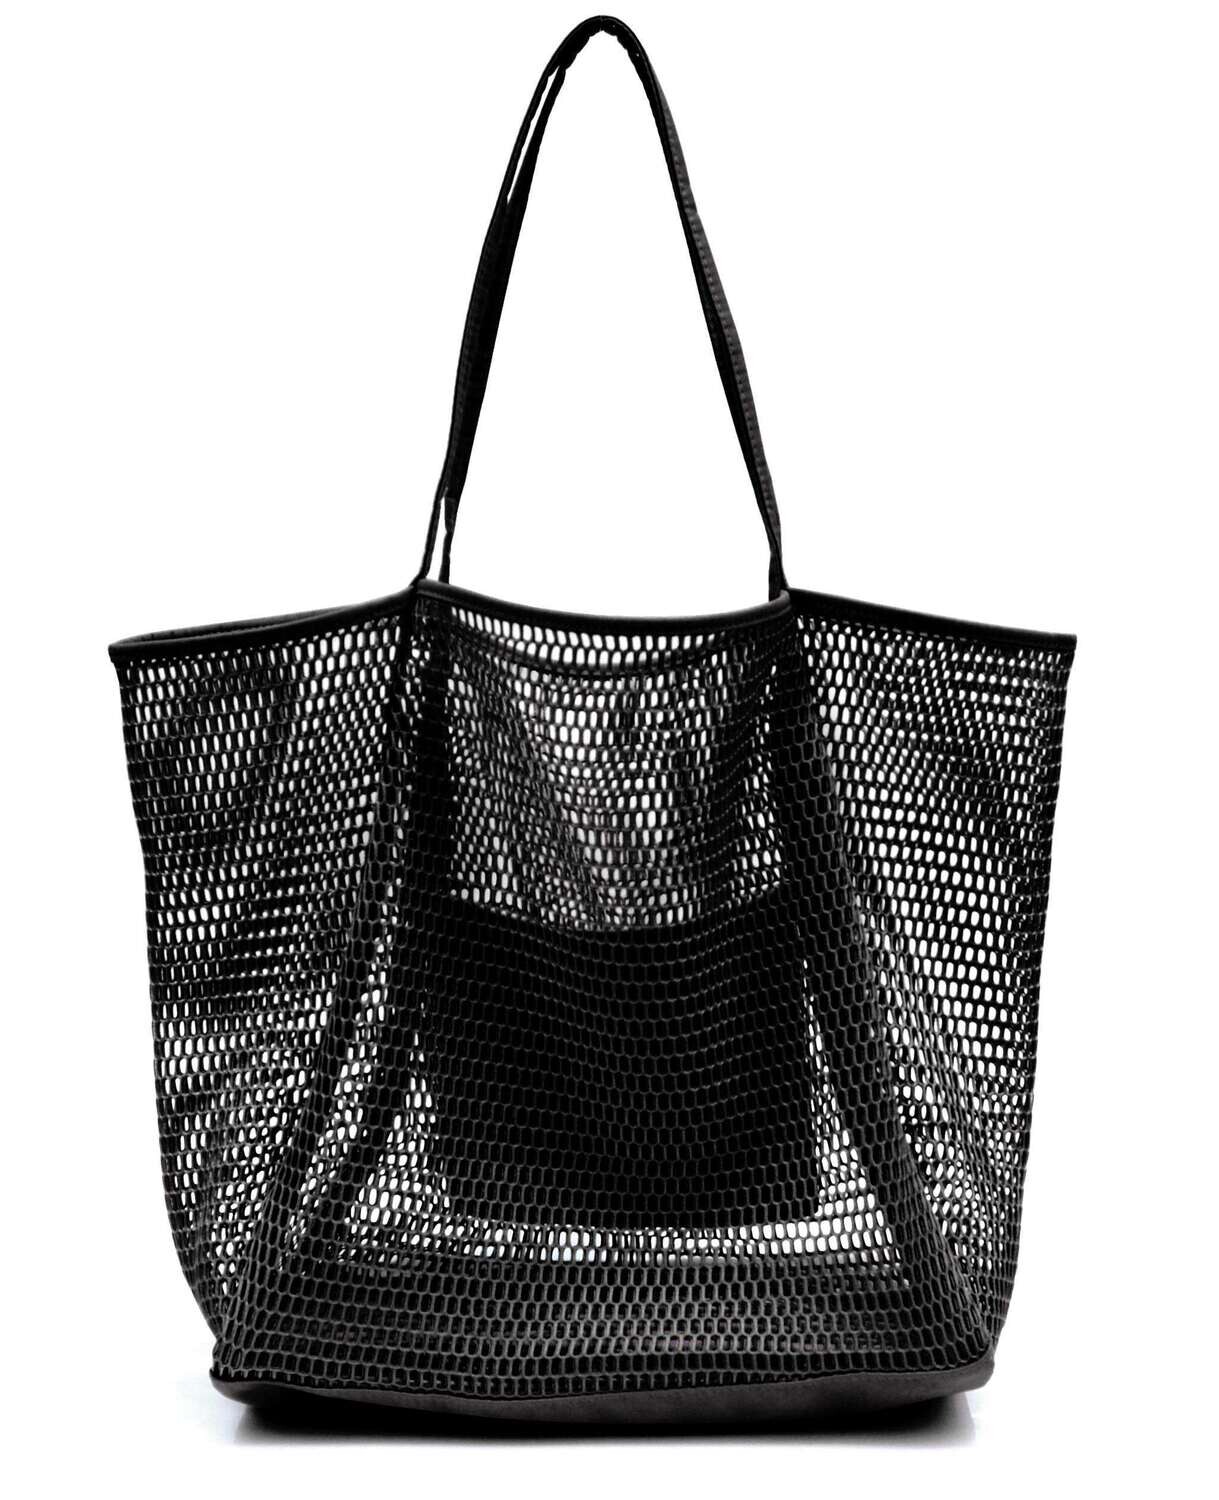 Lightweight Mesh Beach Casual Shoulder Handbag For Beach Picnic Vacation Large Capacity Grocery Tote Bag For Shopping Travel